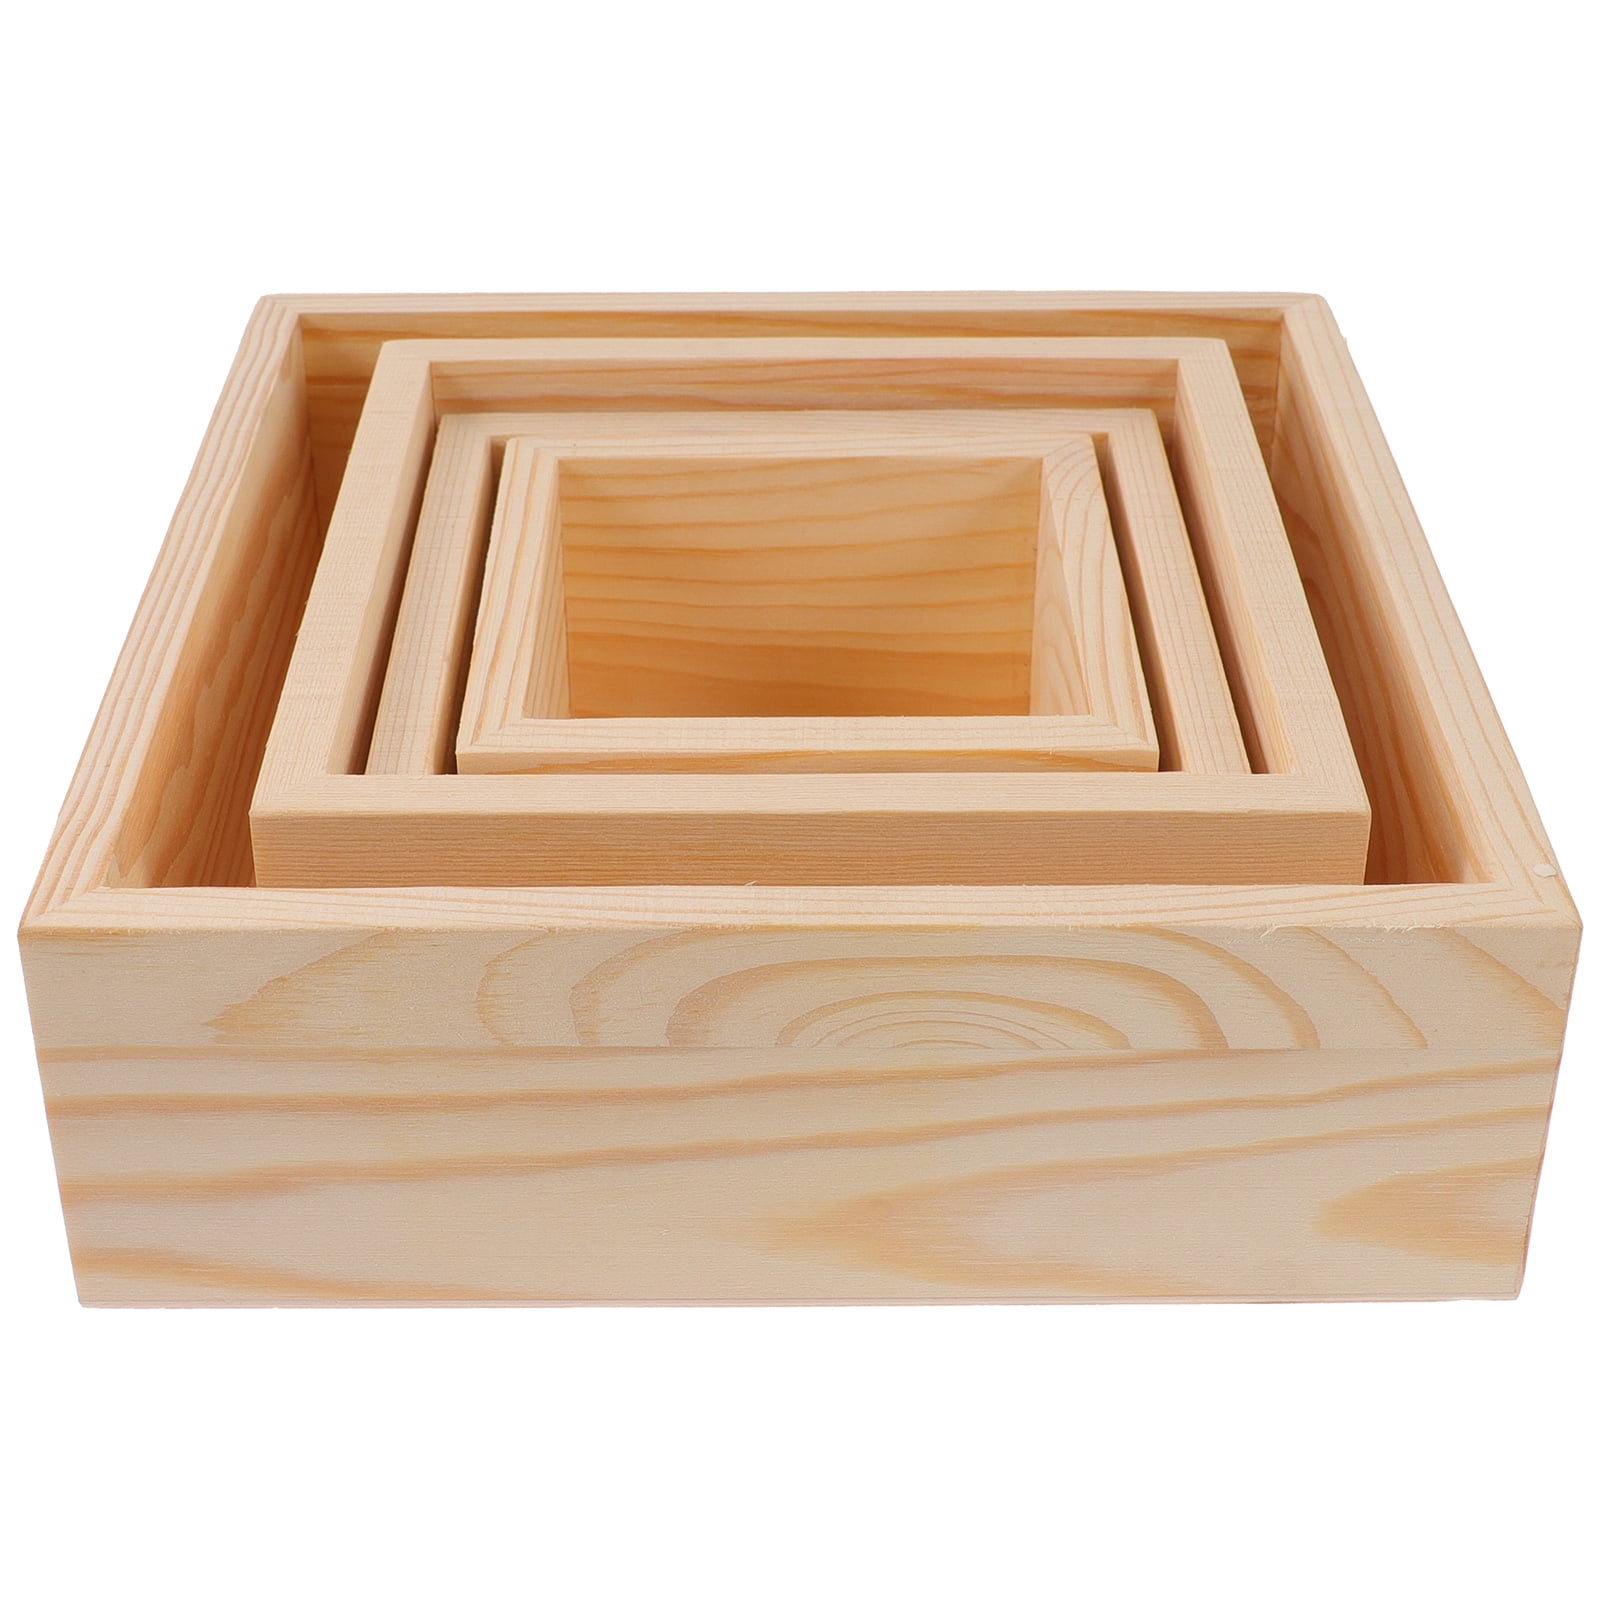  16 Pcs Unfinished Wooden Boxes 4 Size Wood Box Rustic Wooden  Boxes for Crafts Wooden Crates Square Storage Centerpiece Boxes for Table  Home Drawer Decor Treasure, 4 x 4, 5 x 5, 6 x 6, 7 x 7 Inch